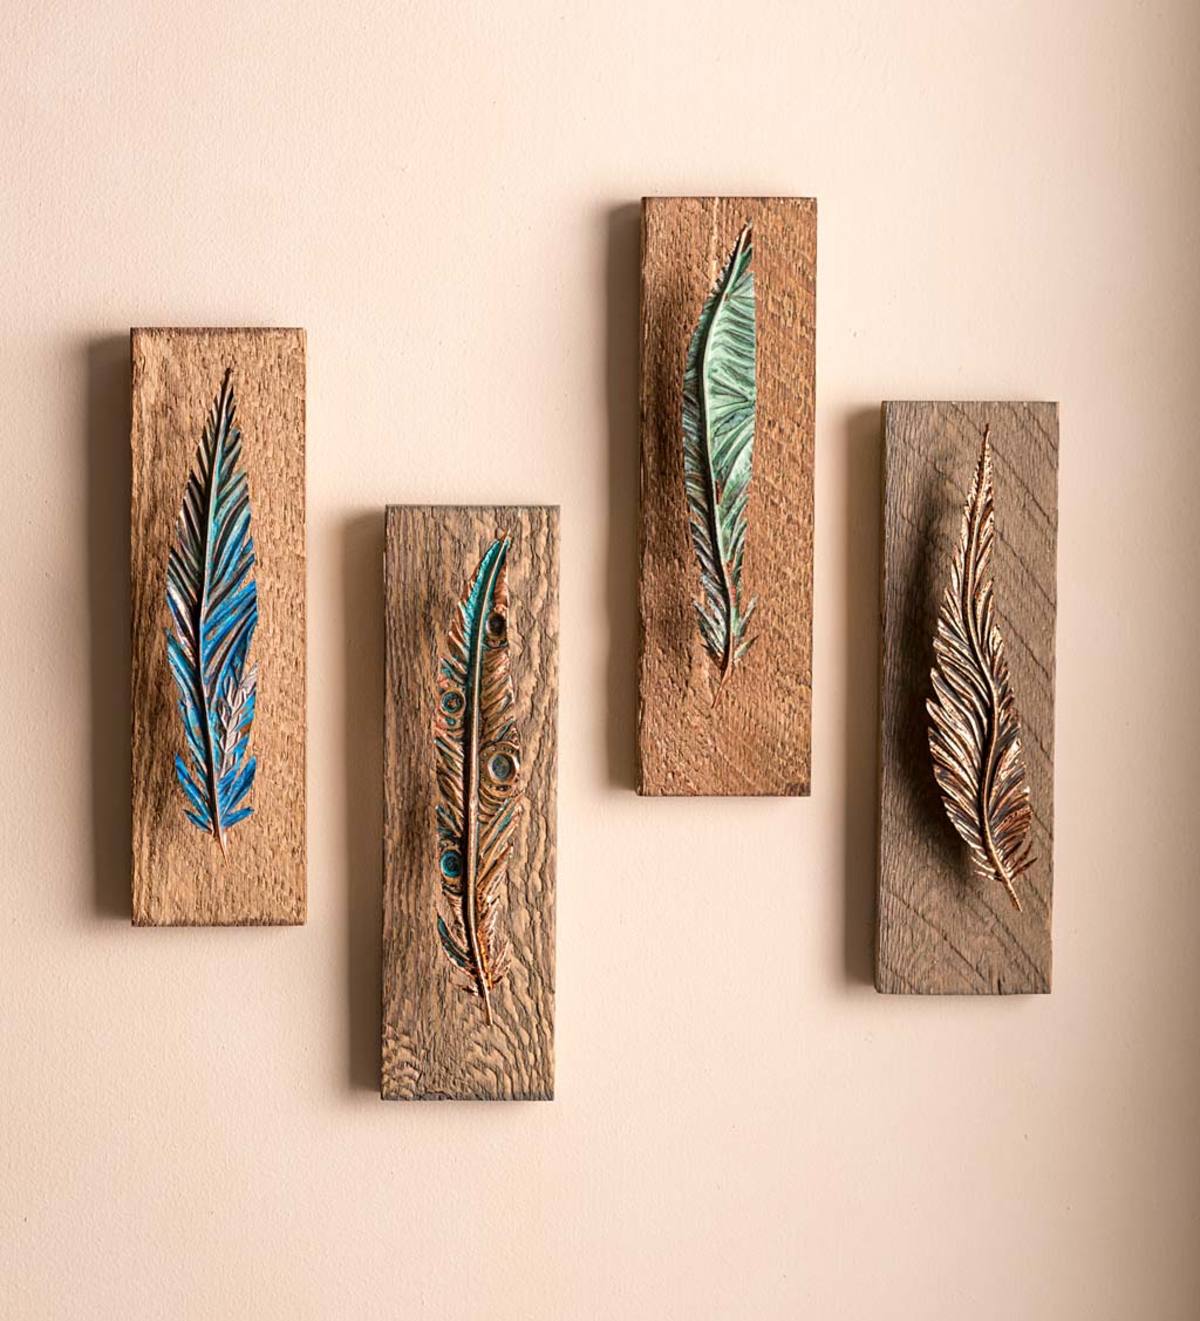 A Feather metal rustic wall art decorative home decor 